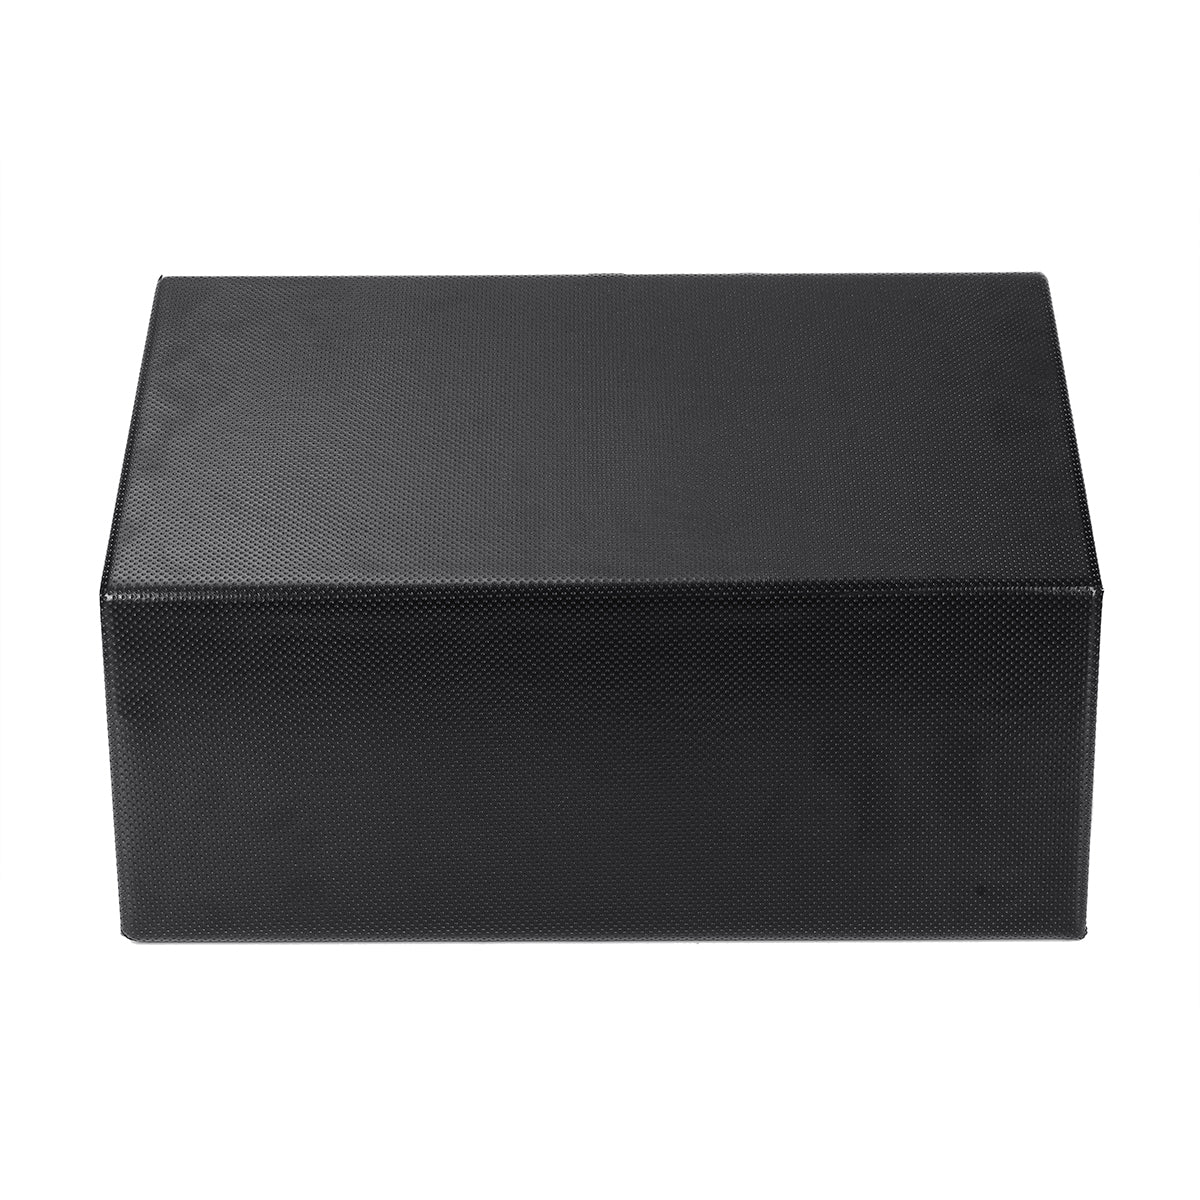 Dark Slate Gray W10 Car Active Audio Stereo Subwoofer Powered Amplifier Enclosure Speaker With Wire 1100W 12V